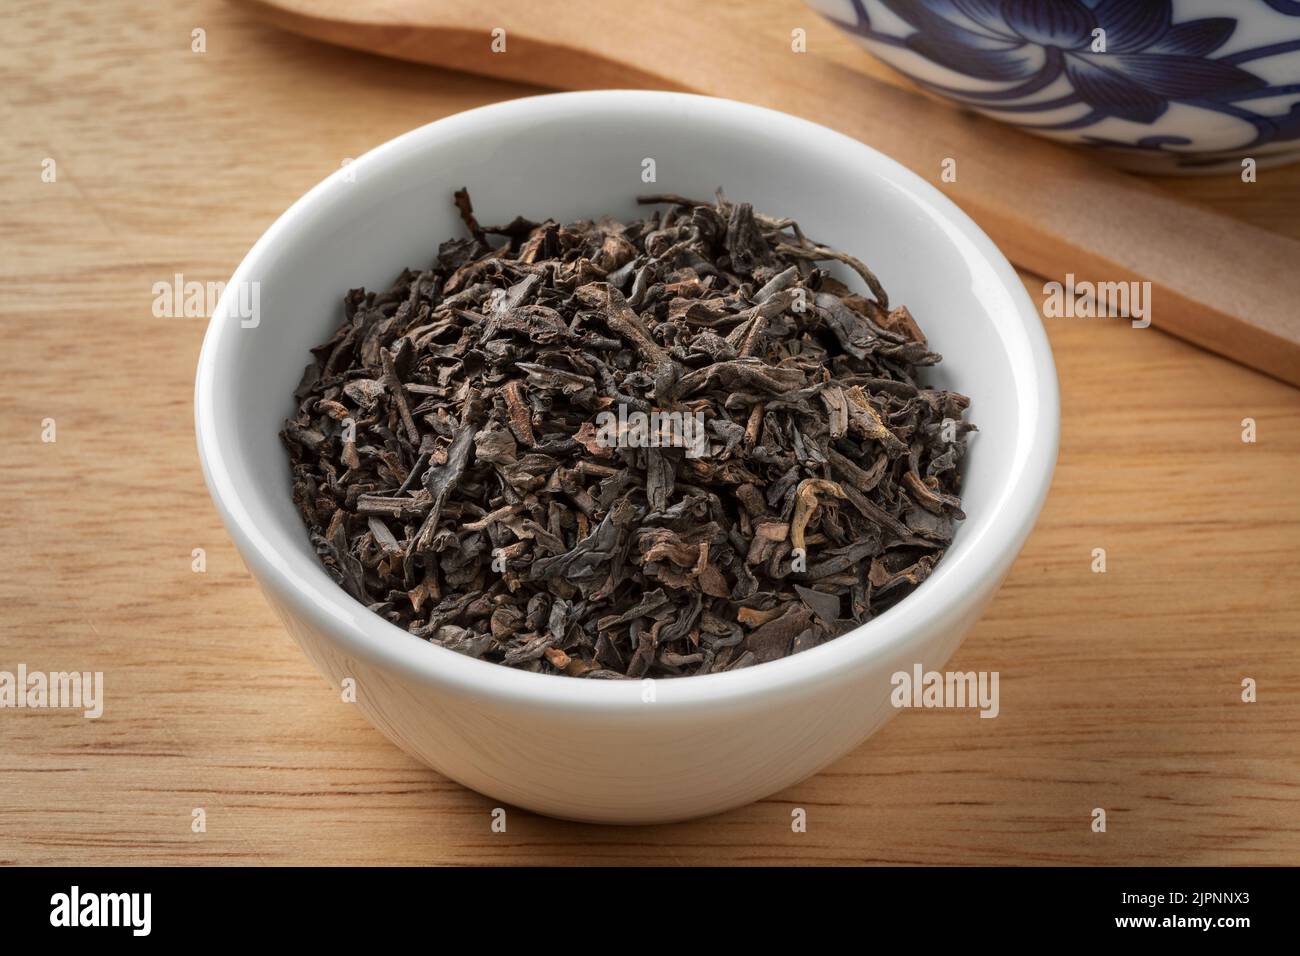 Bowl with Chinese Pu Ehr dried tea leaves close up Stock Photo